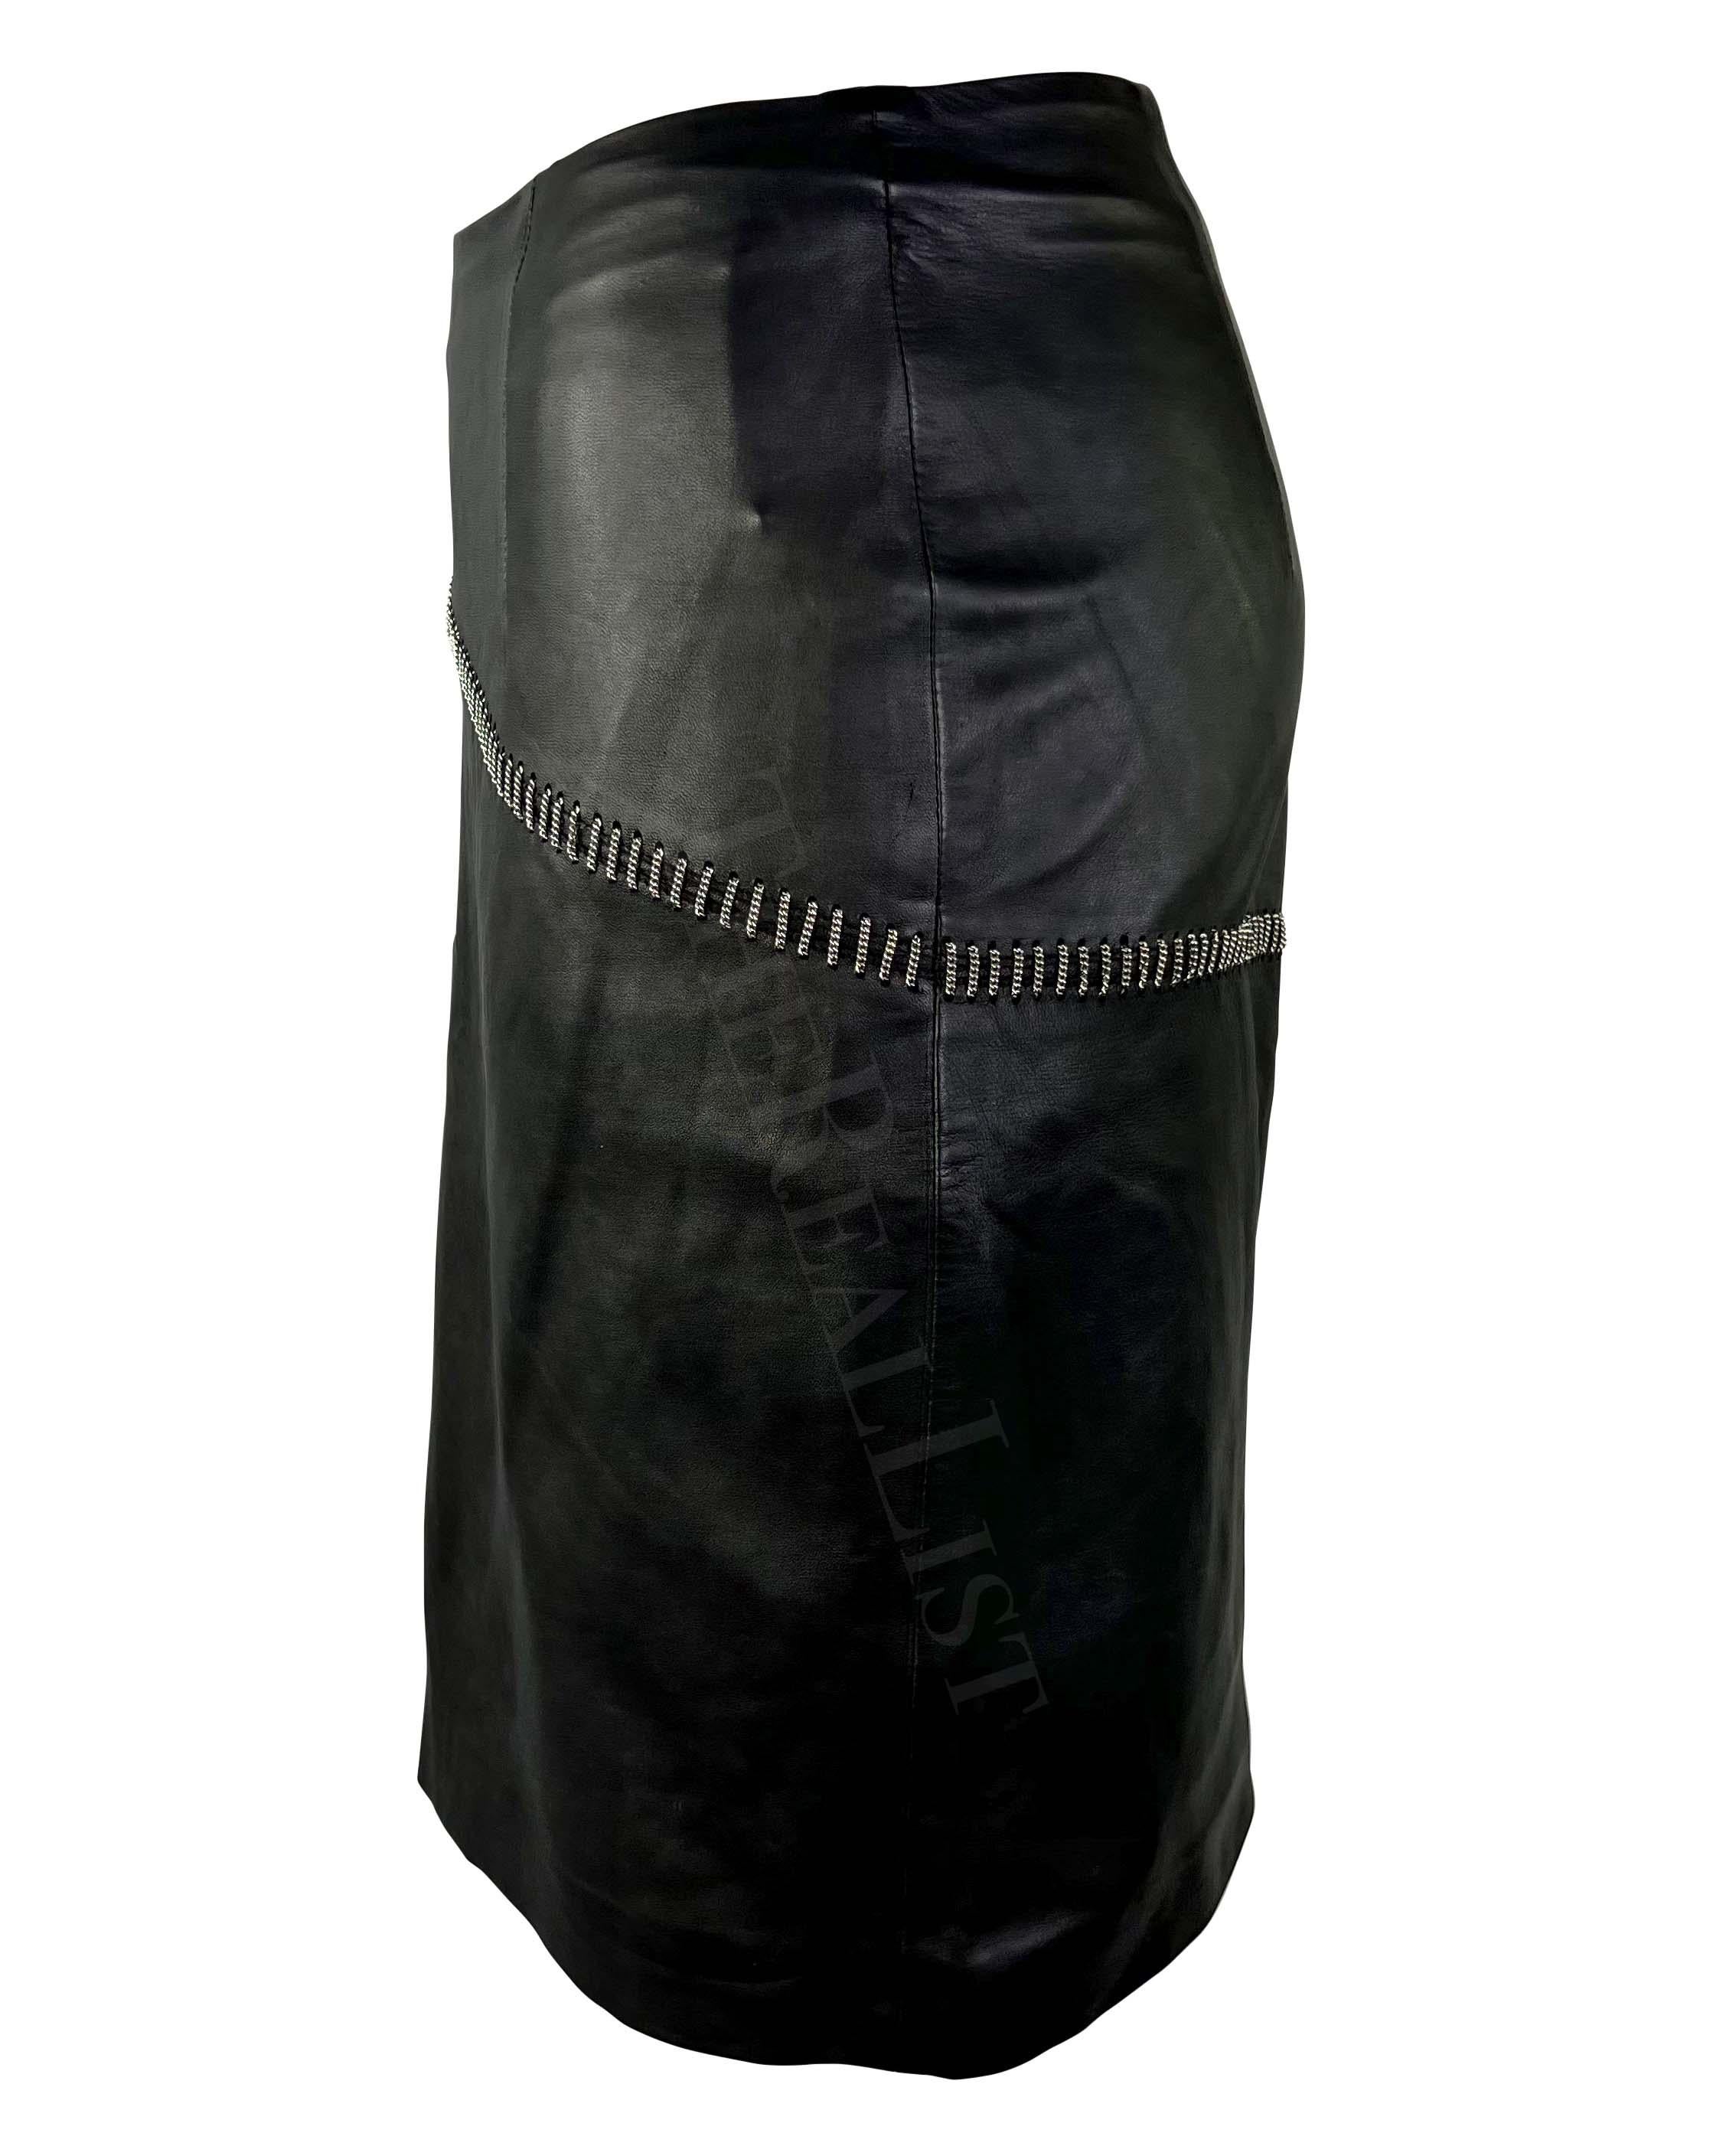 Women's S/S 1999 Gianni Versace by Donatella Black Leather Silver Chain Mini Skirt For Sale